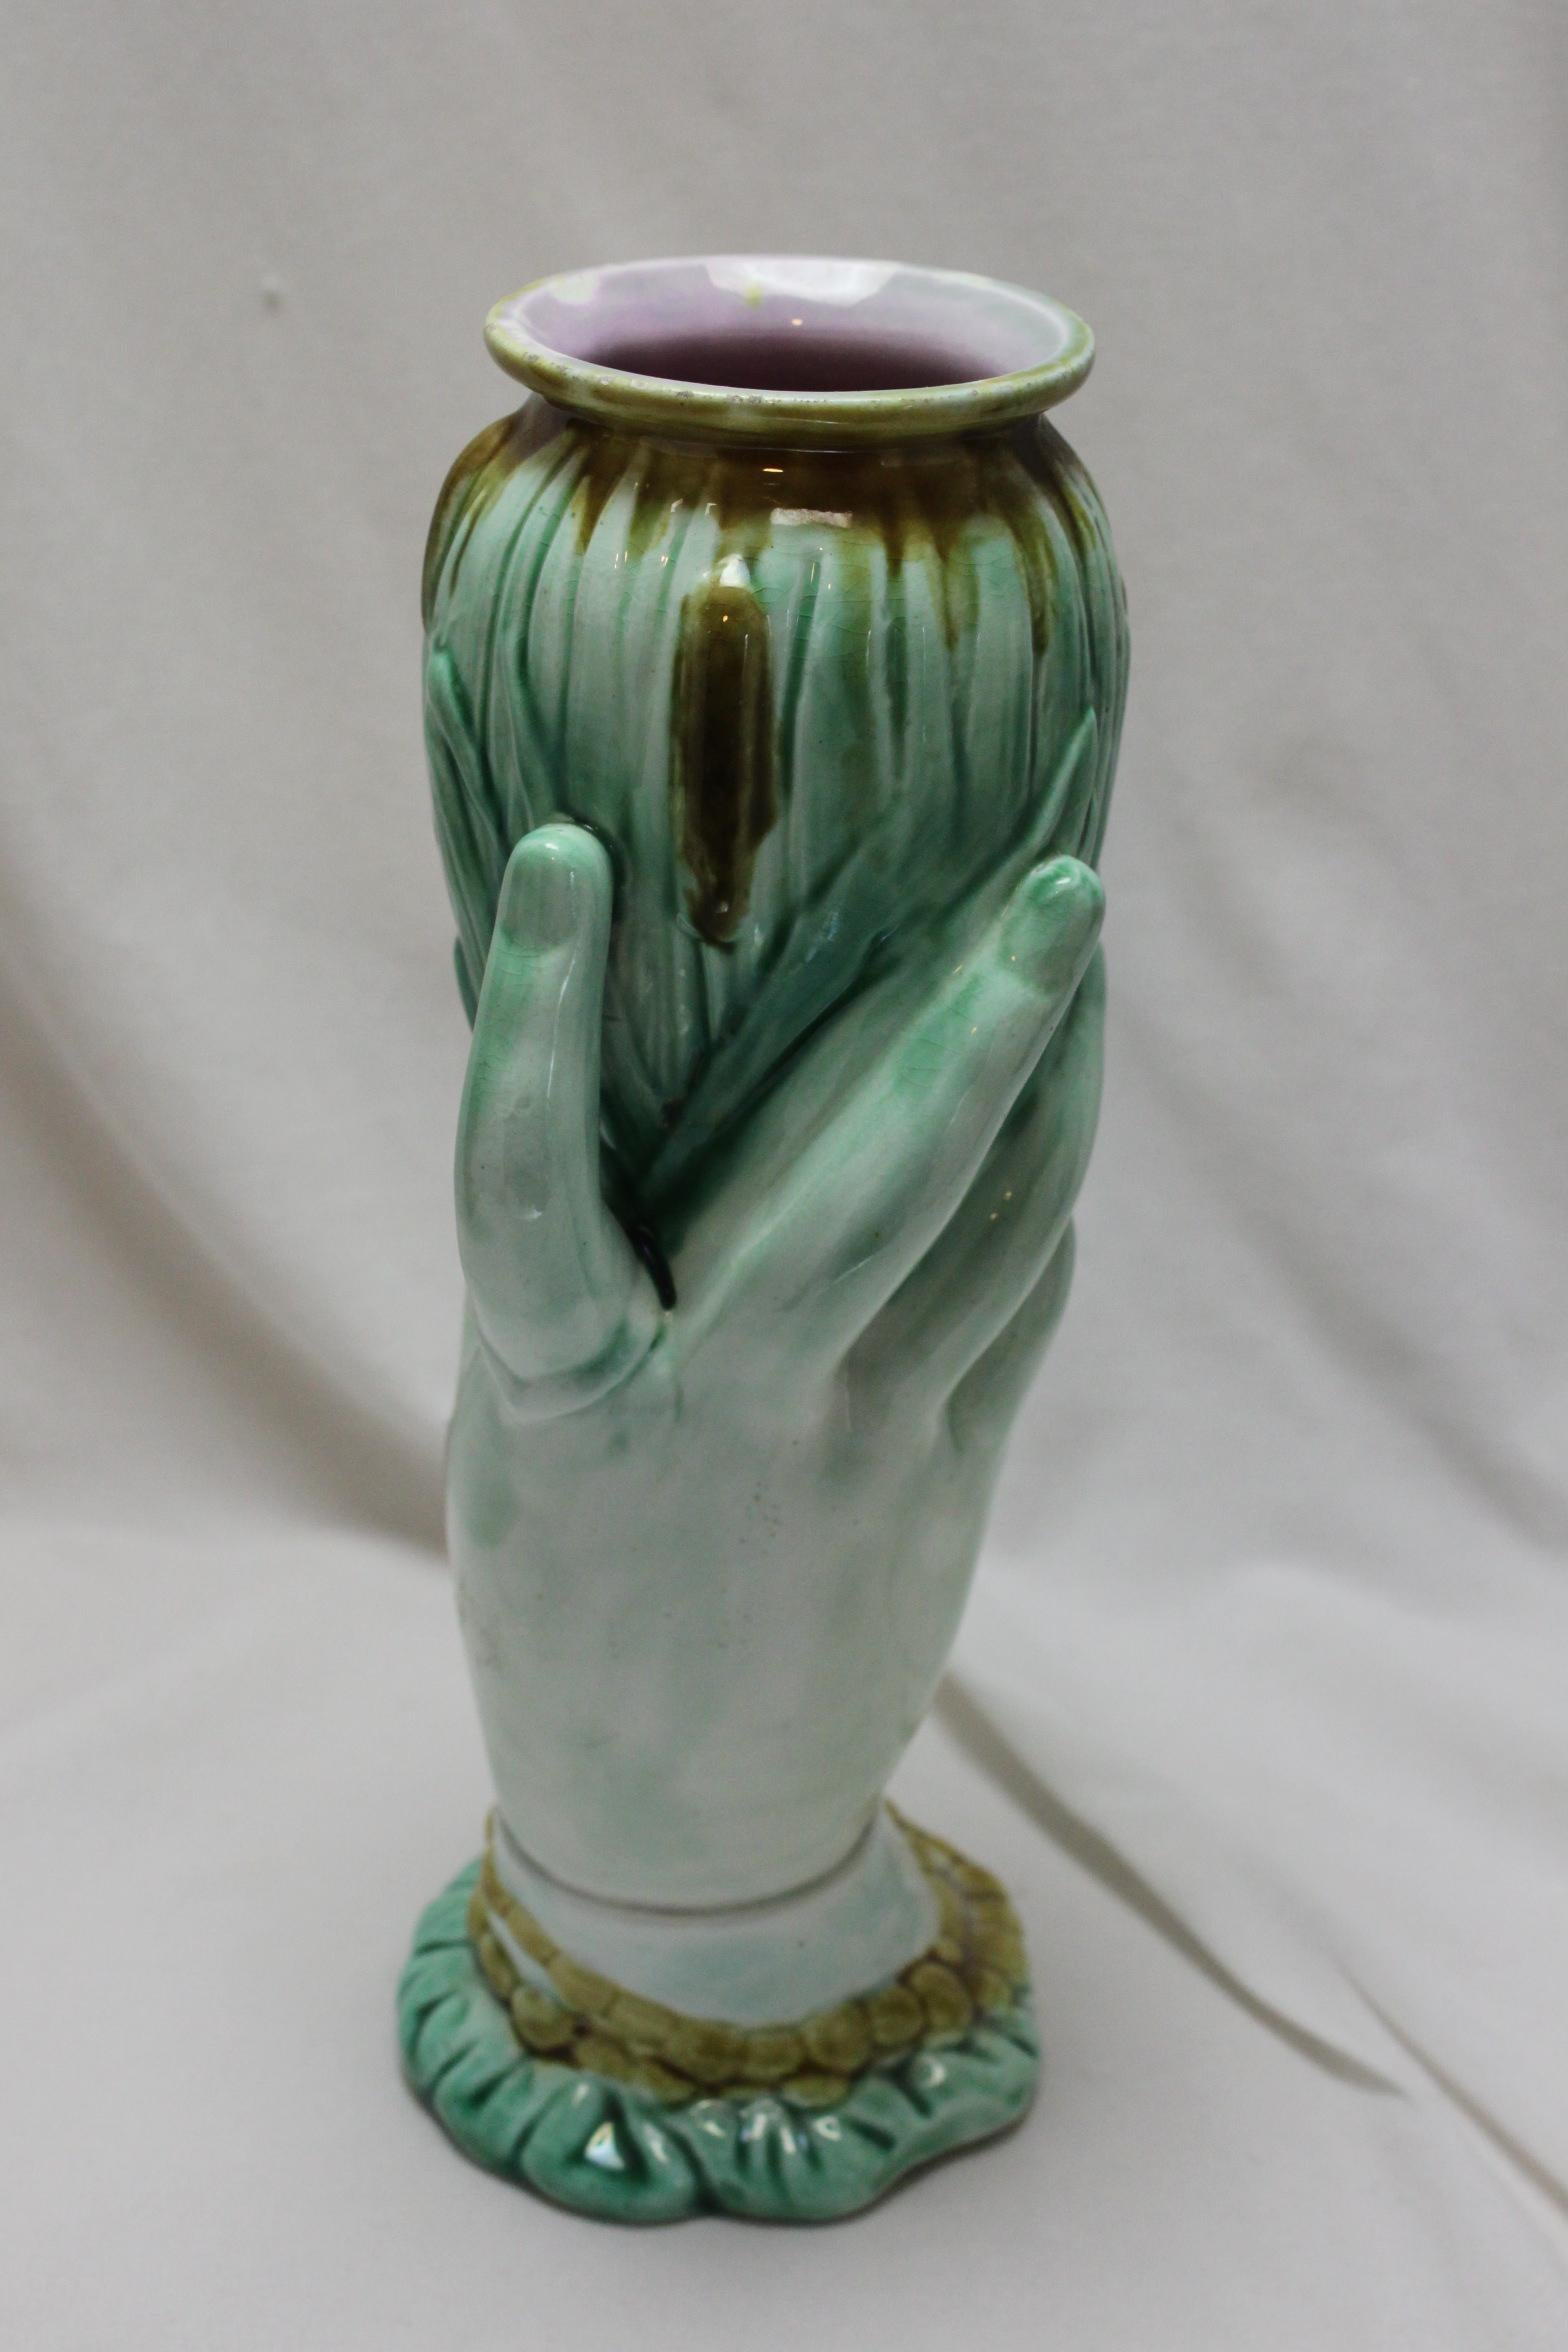 This majolica glazed vase is made up of a ladies hand holding a bunch of bullrushes which forms the vase part. Her wrist is clothed in a ruffled sleeve, over which is a beaded bracelet, and she has an unusual ring on her index finger. The vase is